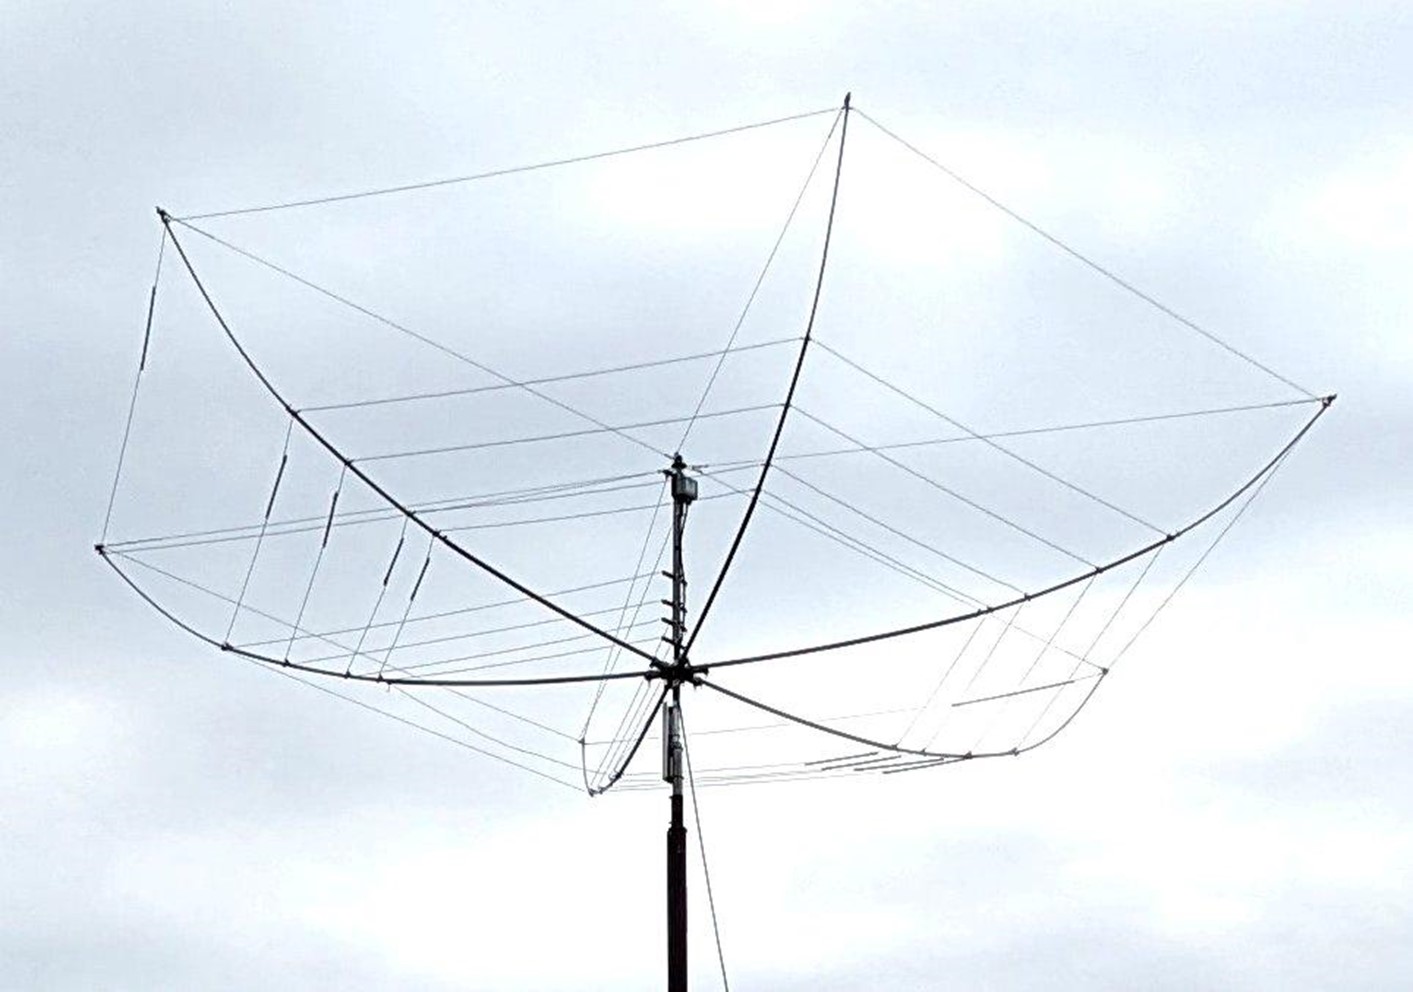 New DX Engineering Gear at Dayton Hamvention 2023 Upgraded Yagi Antenna Design Software and More